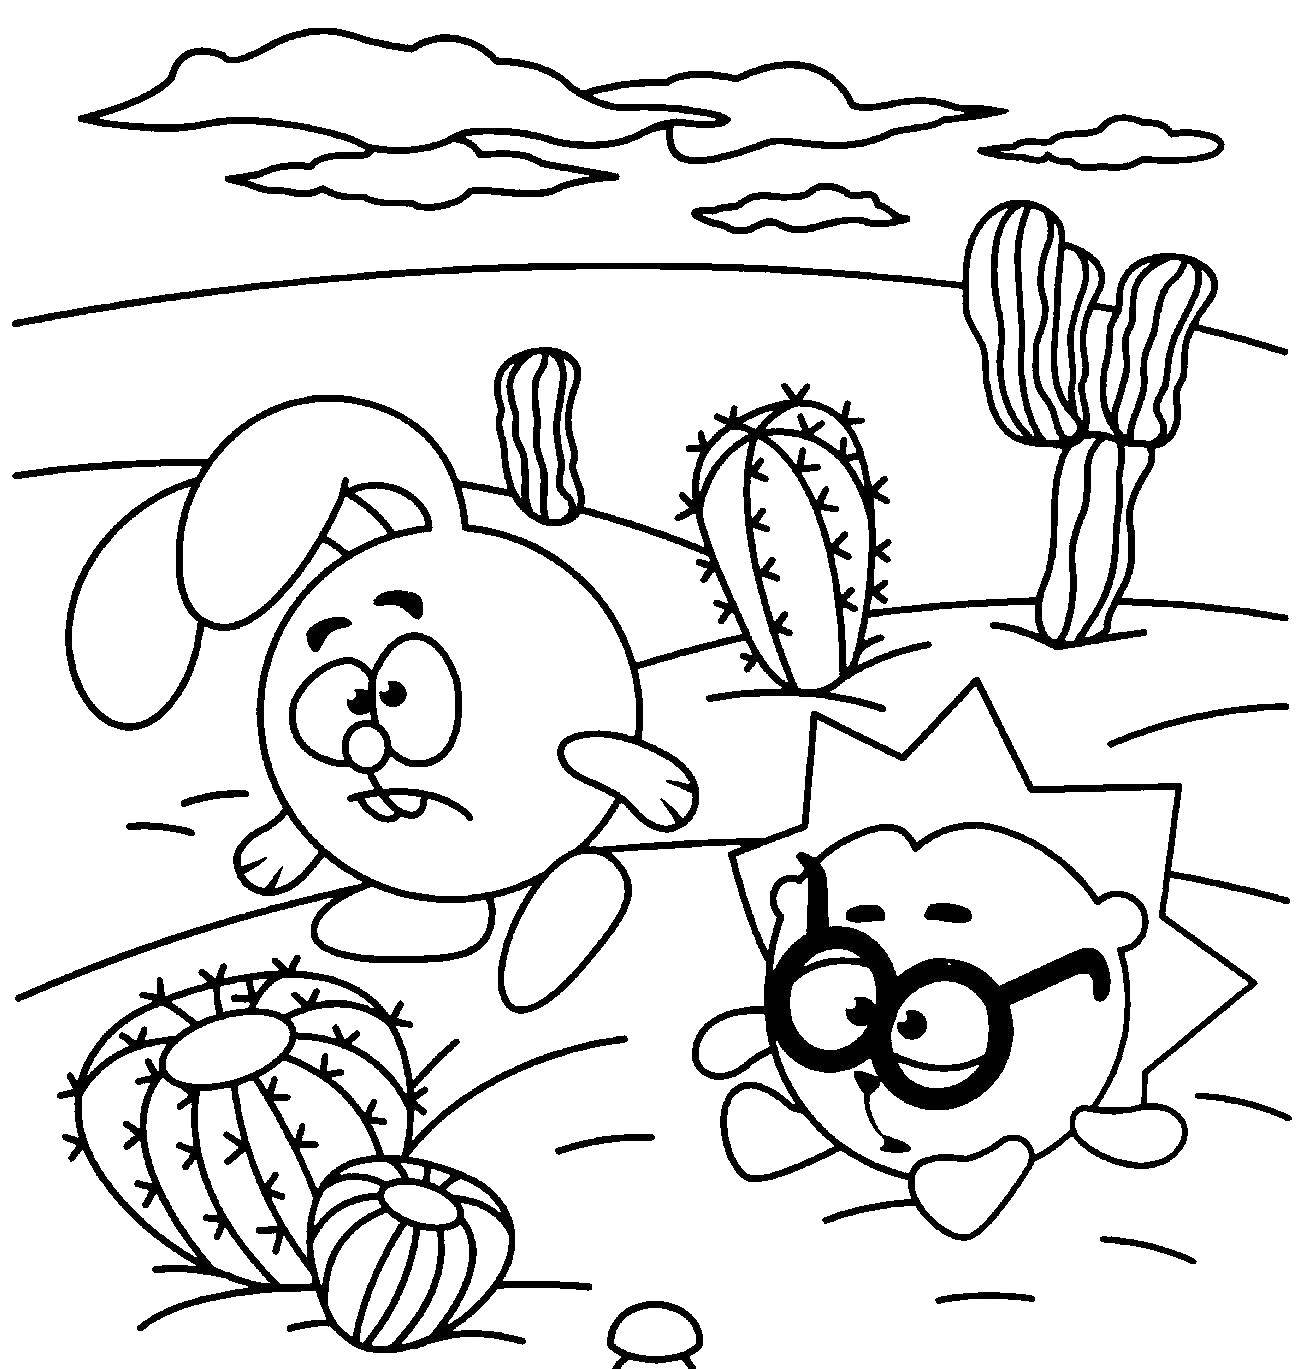 Coloring Croche and hedgehog in the desert. Category Smeshariki . Tags:  Smeshariki .